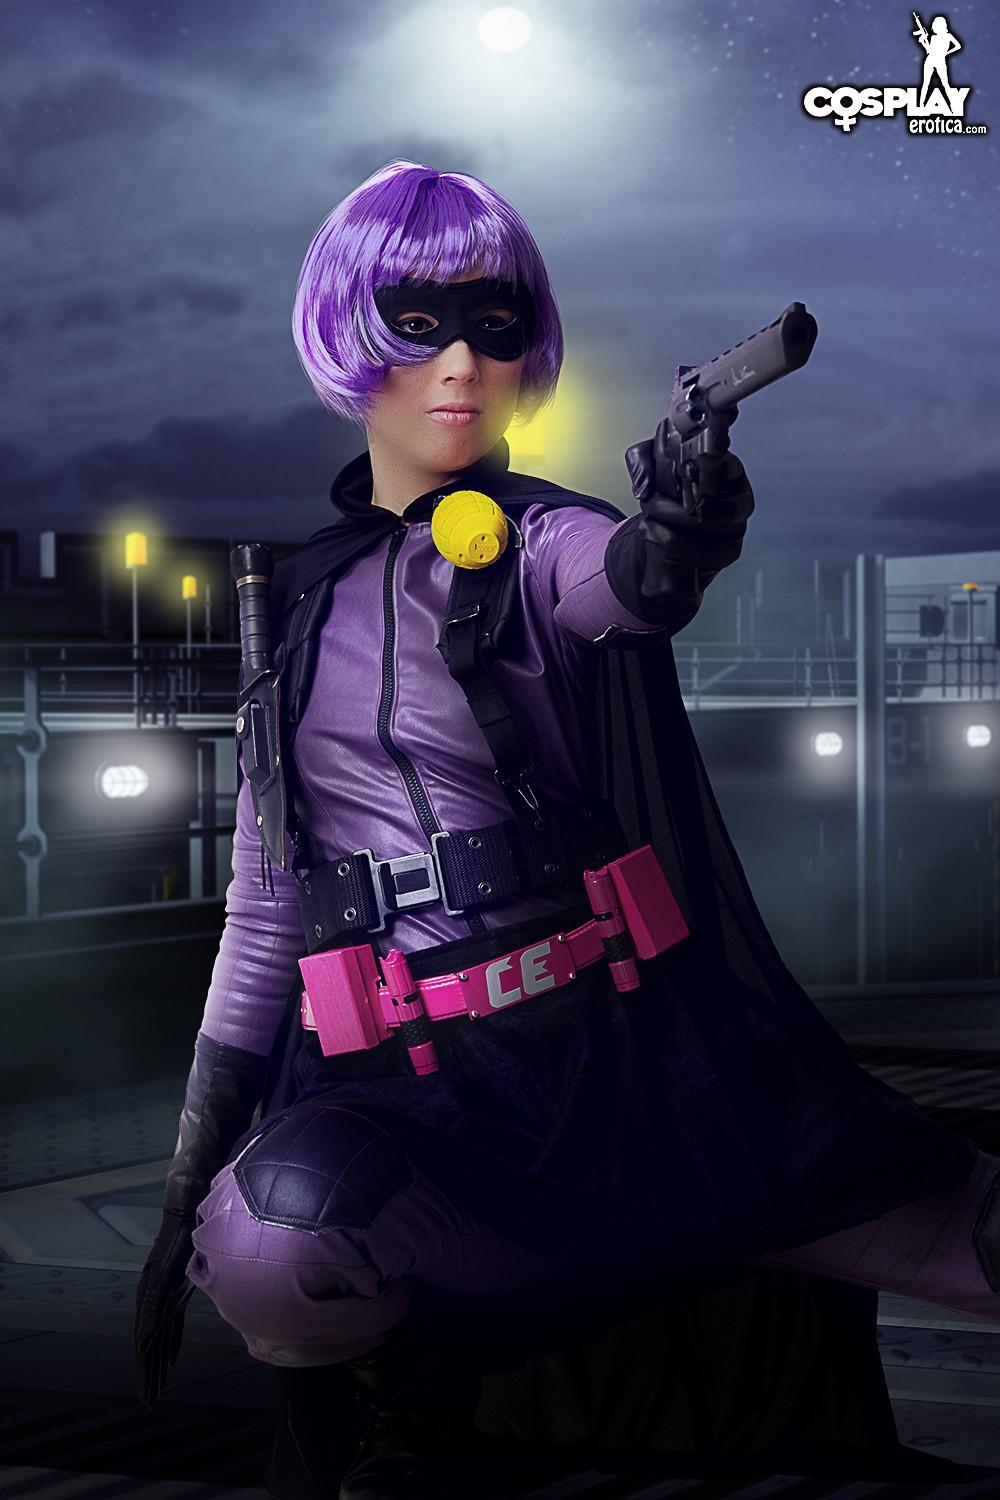 Beautiful cosplayer Stacy dresses up as Hit Girl #60007731